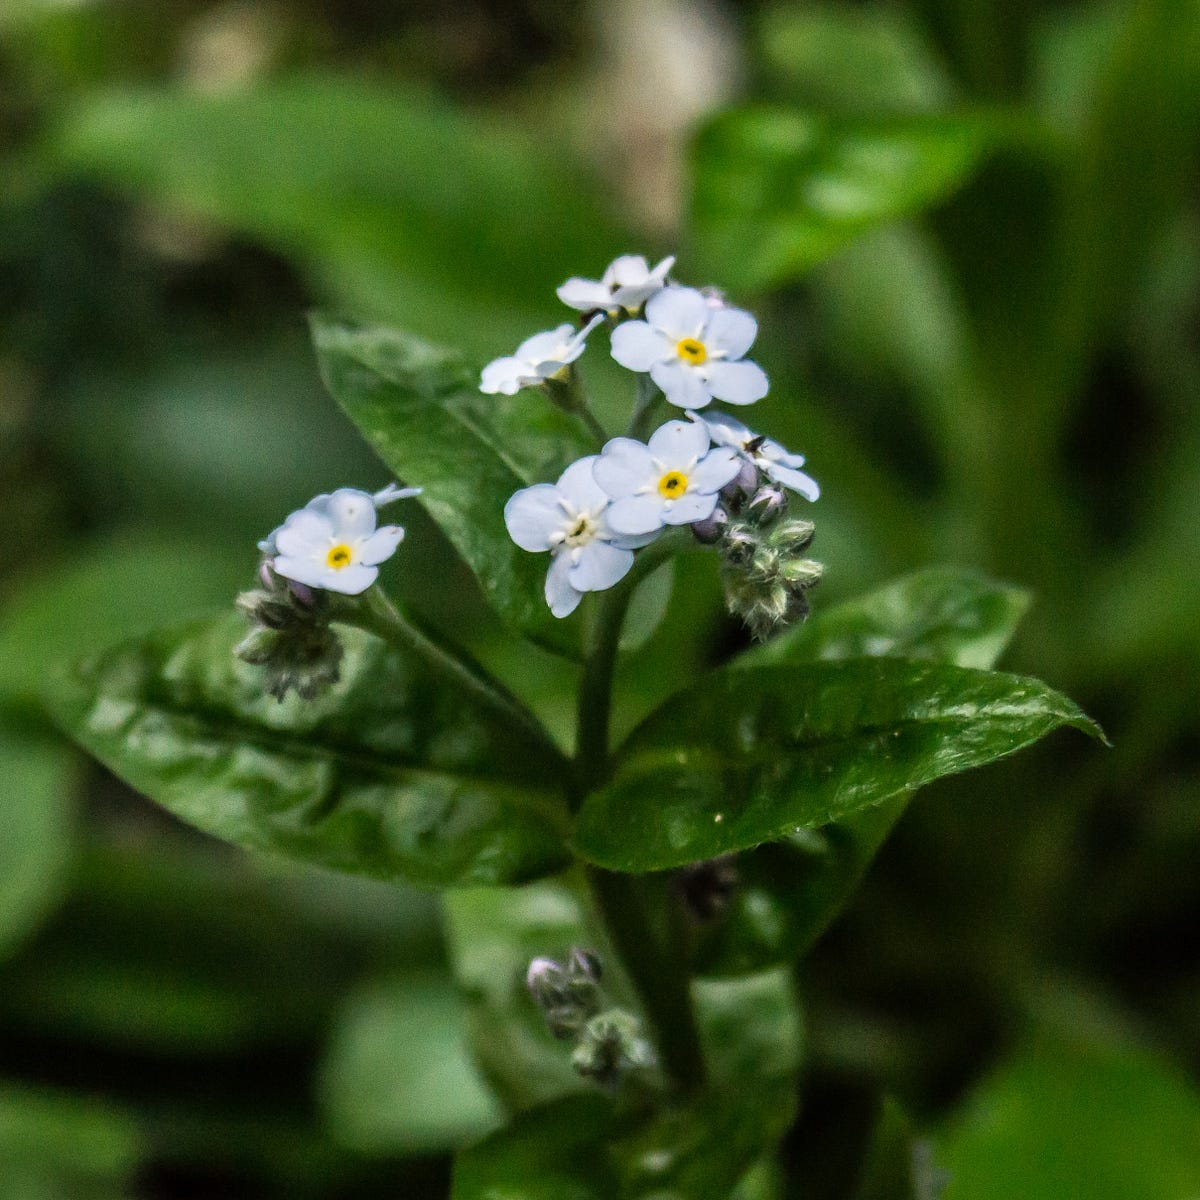 Forget-Me-Not Problems - Pests And Diseases Of Forget-Me-Not Plants